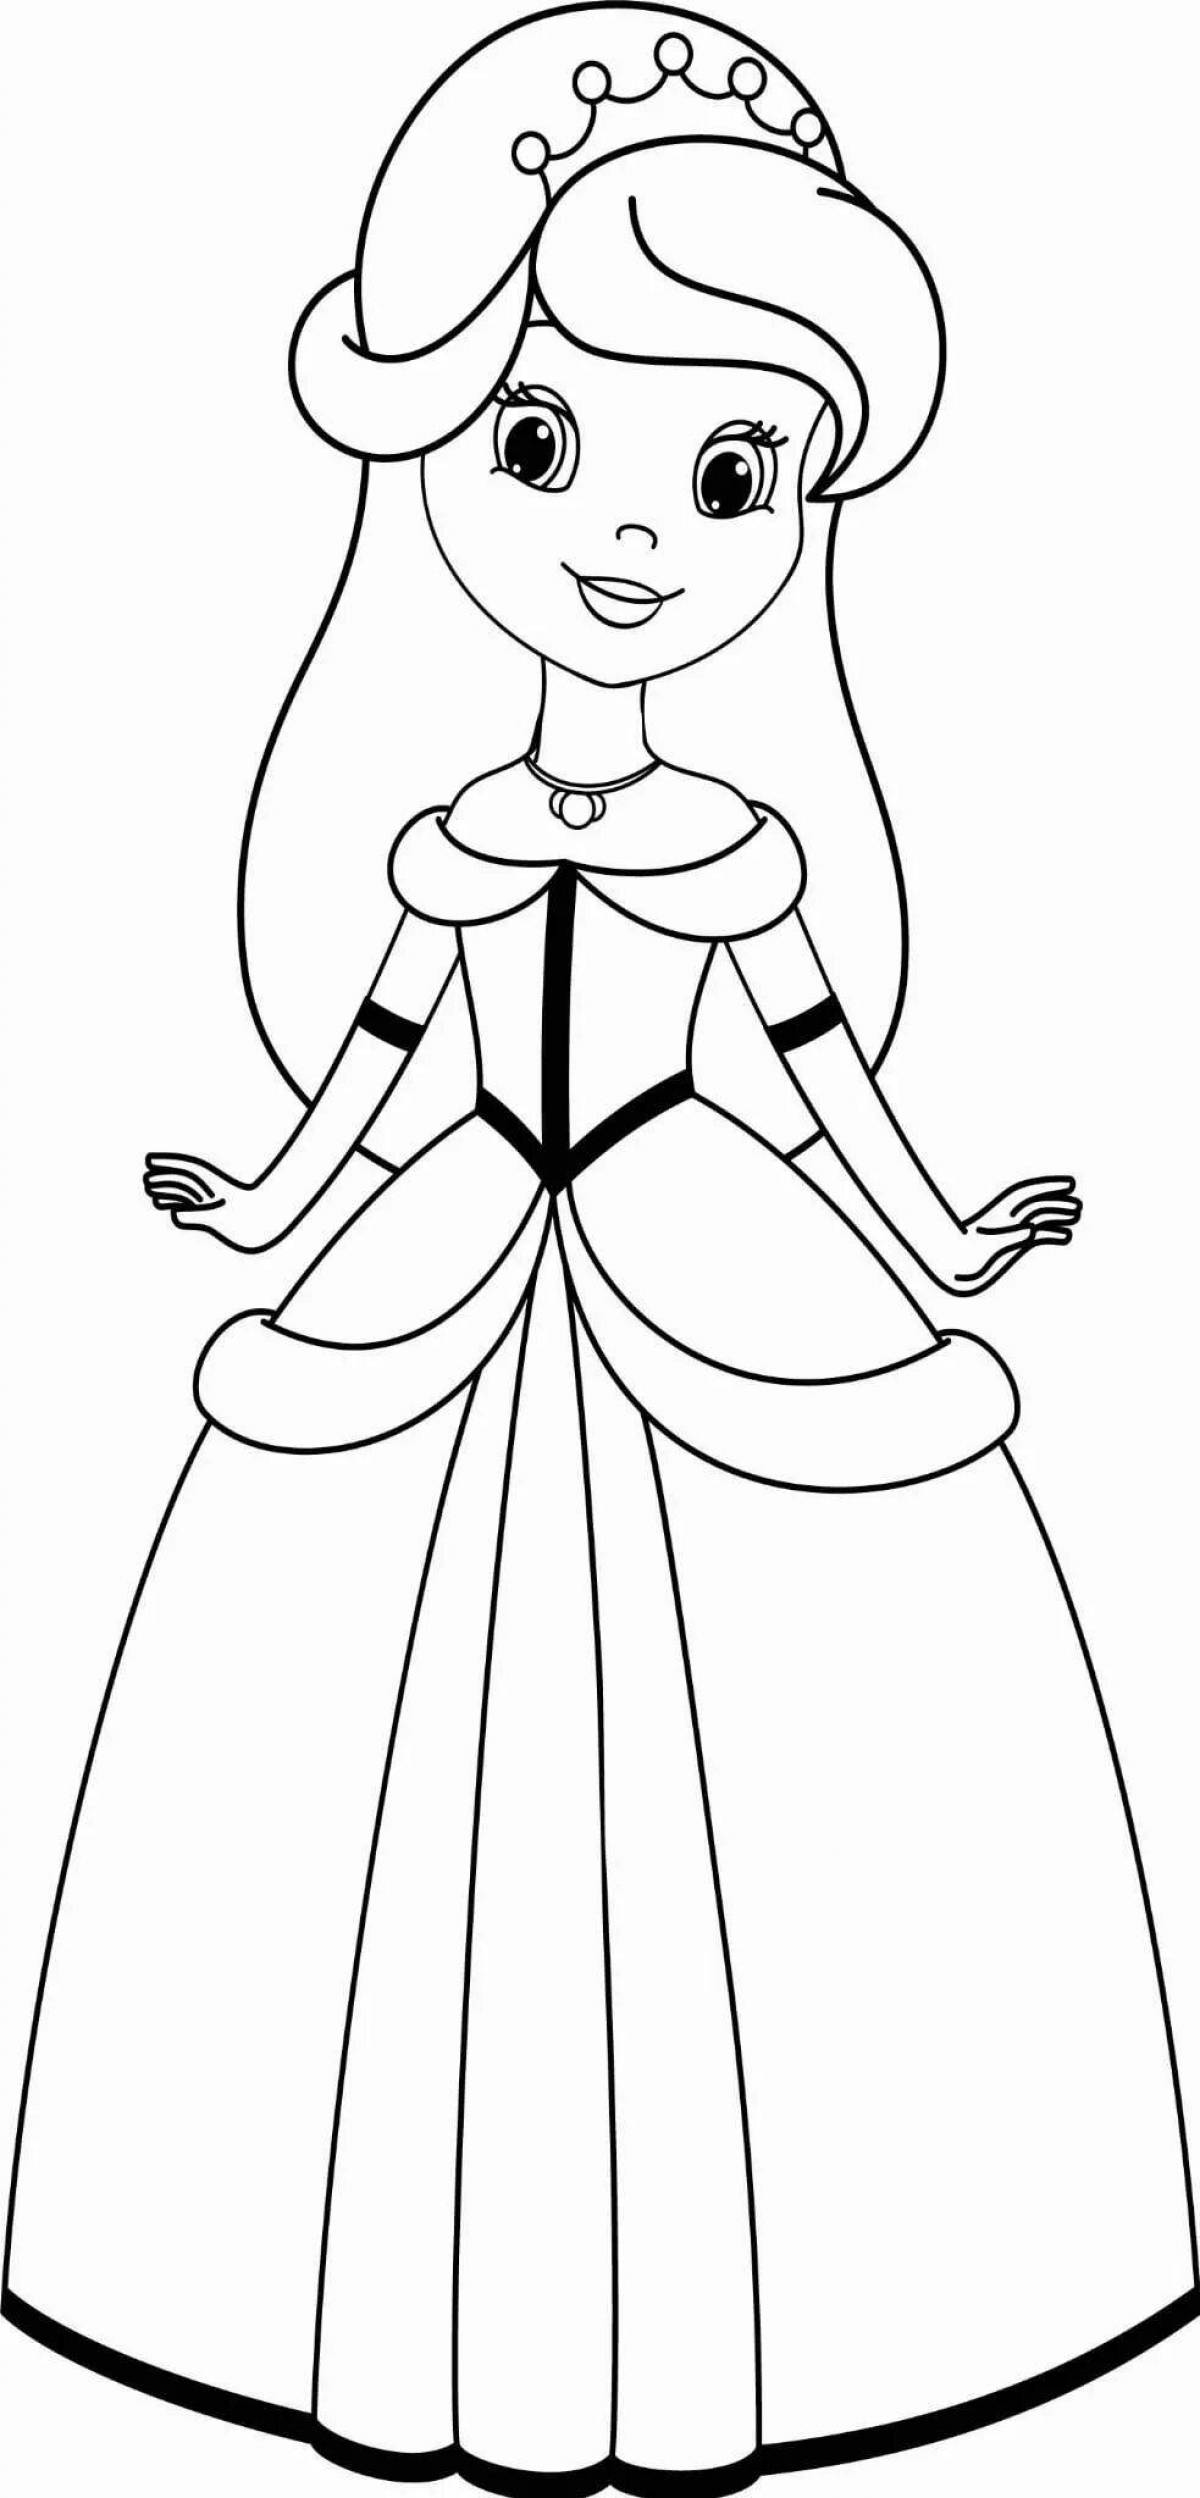 Beautiful princess coloring pages for girls 4-5 years old